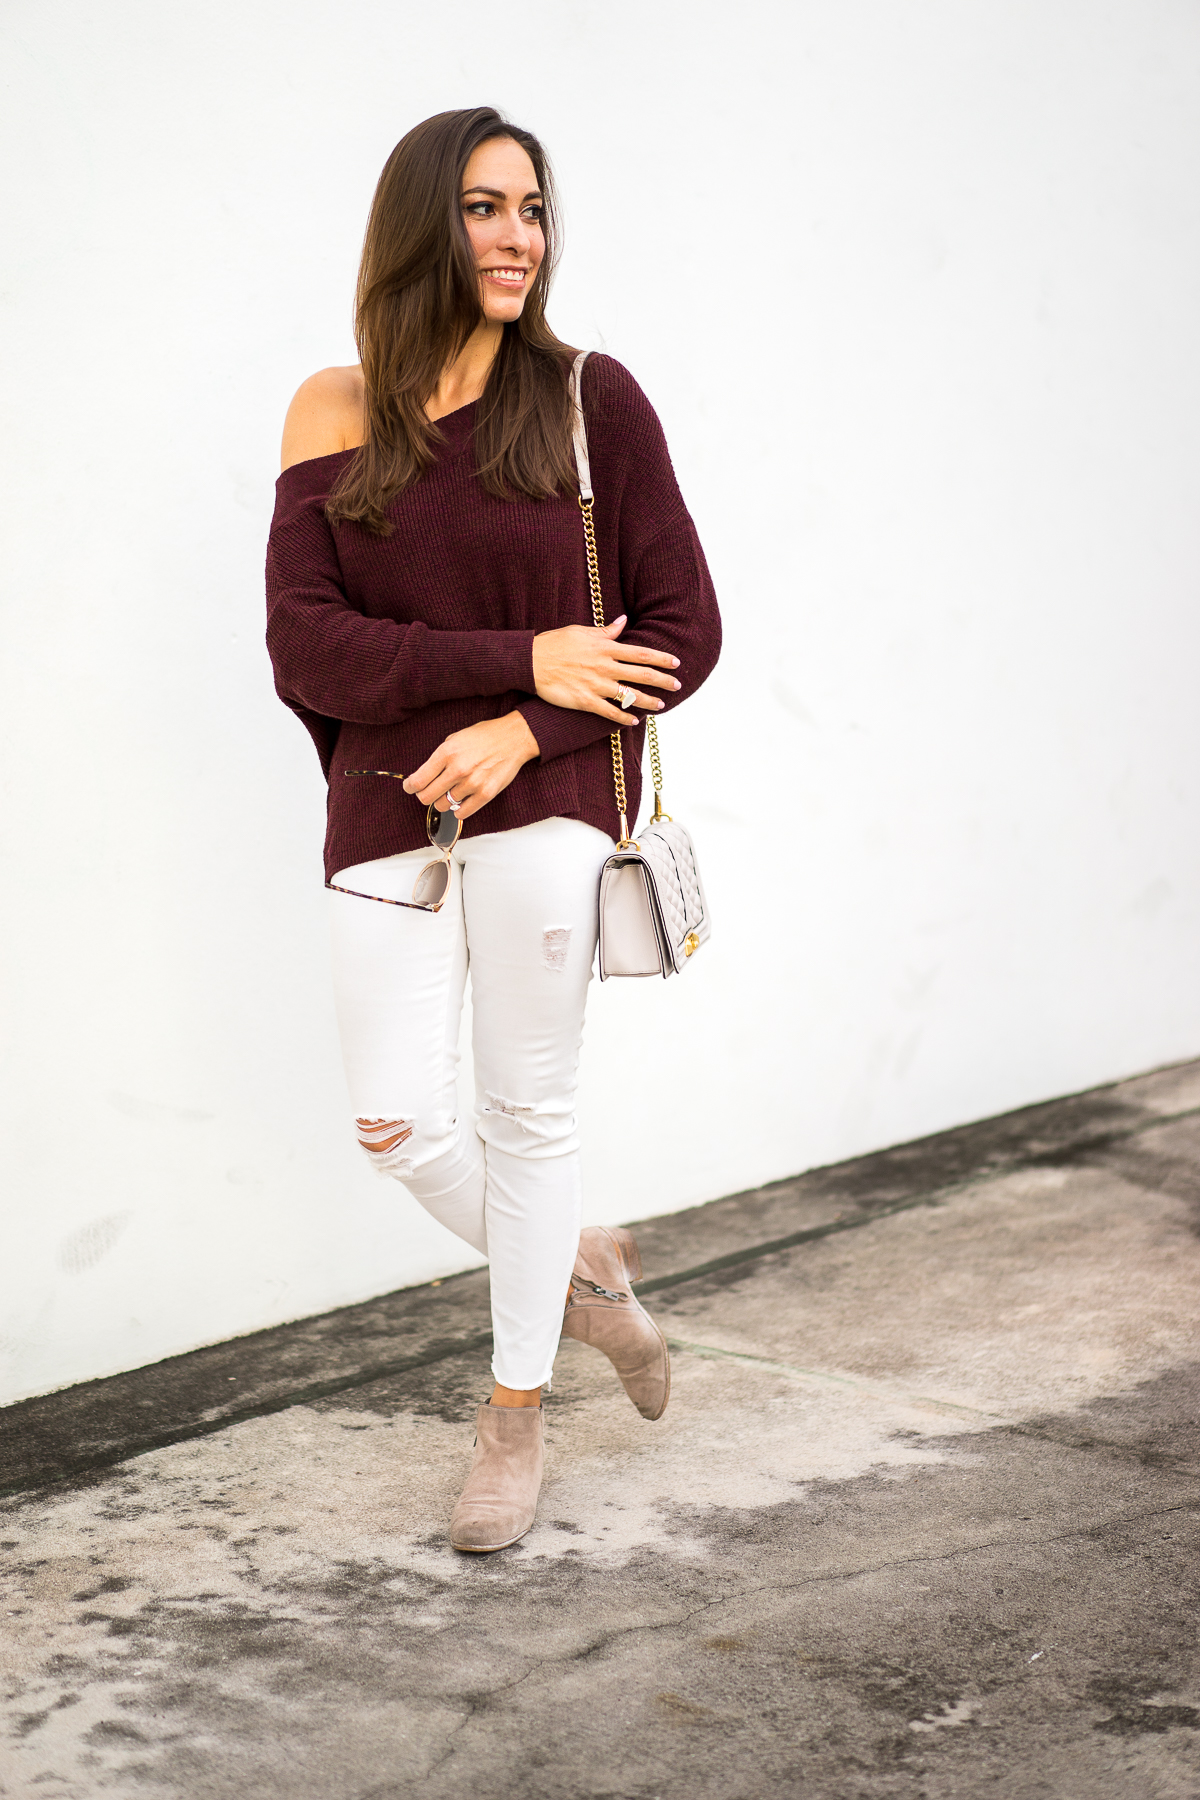 A Glam Lifestyle blogger Amanda Mercado wearing Free People burgundy off the shoulder sweater with white distressed denim and ankle booties